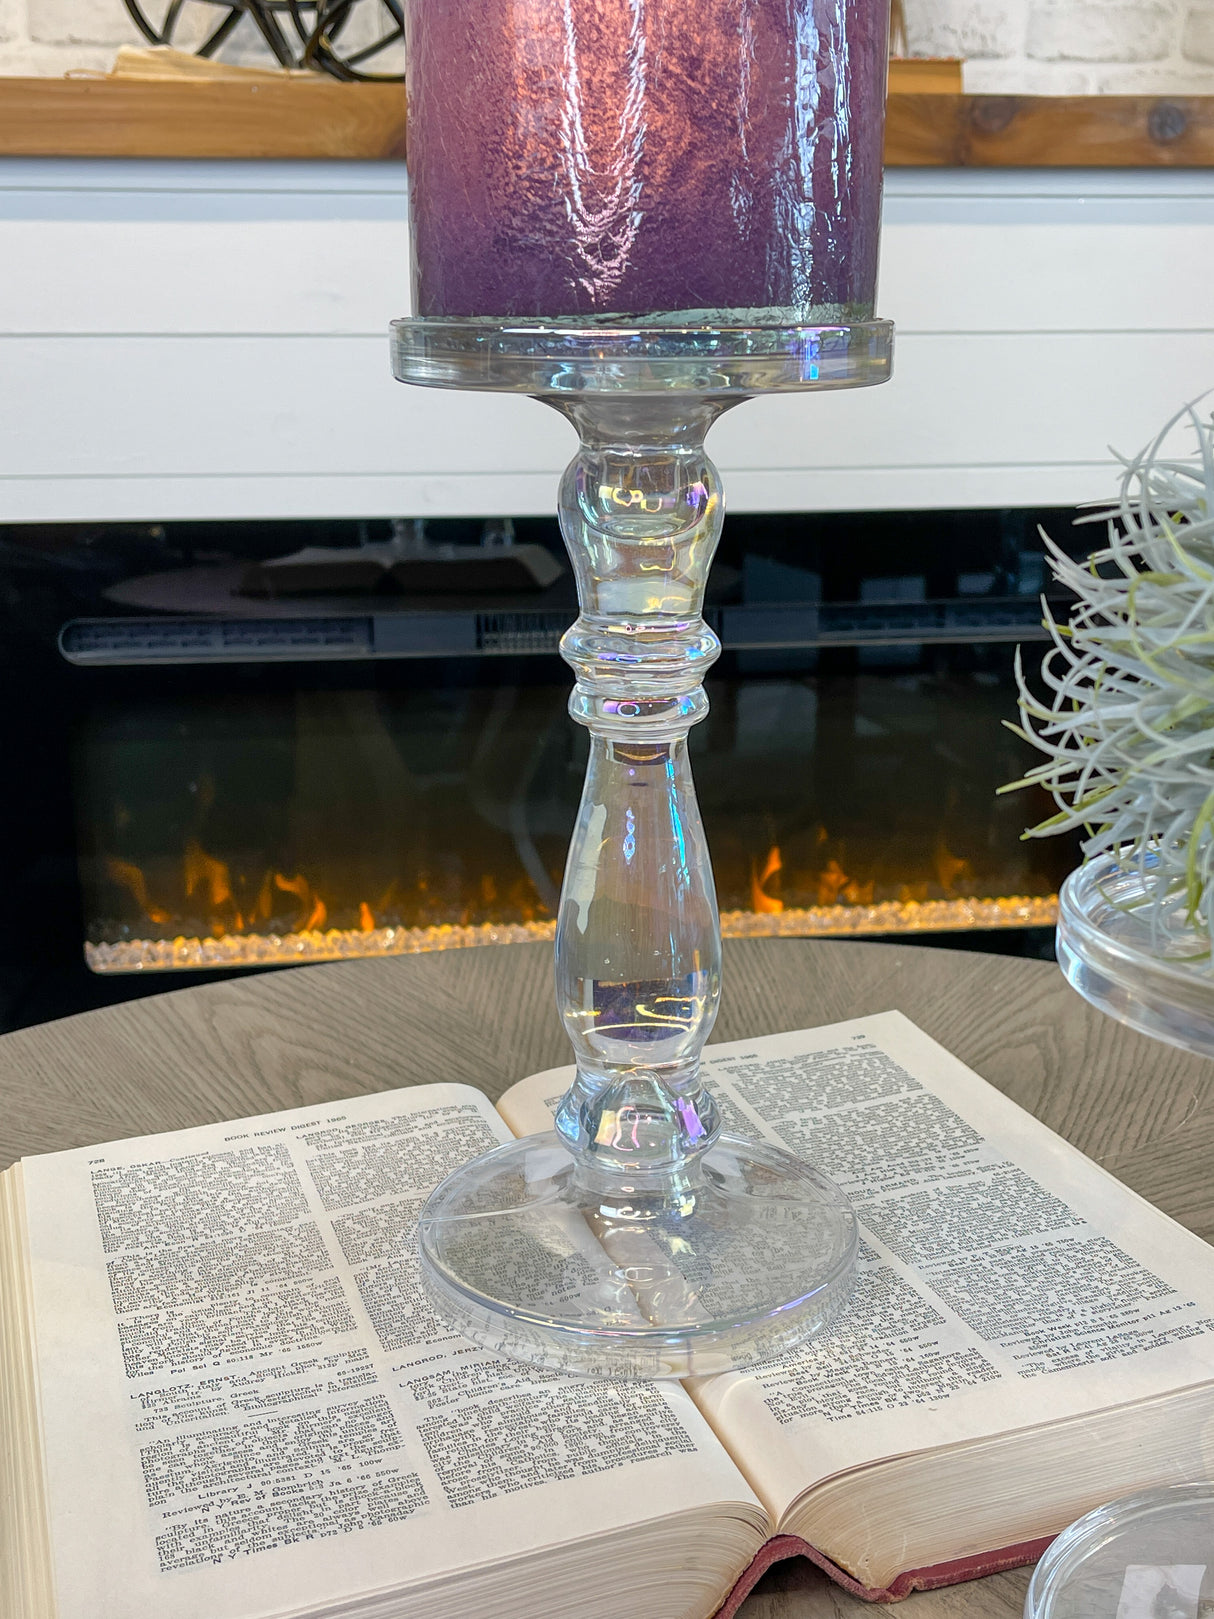 Kathy Iridescent Clear Glass Candle Holder - 2 Sizes